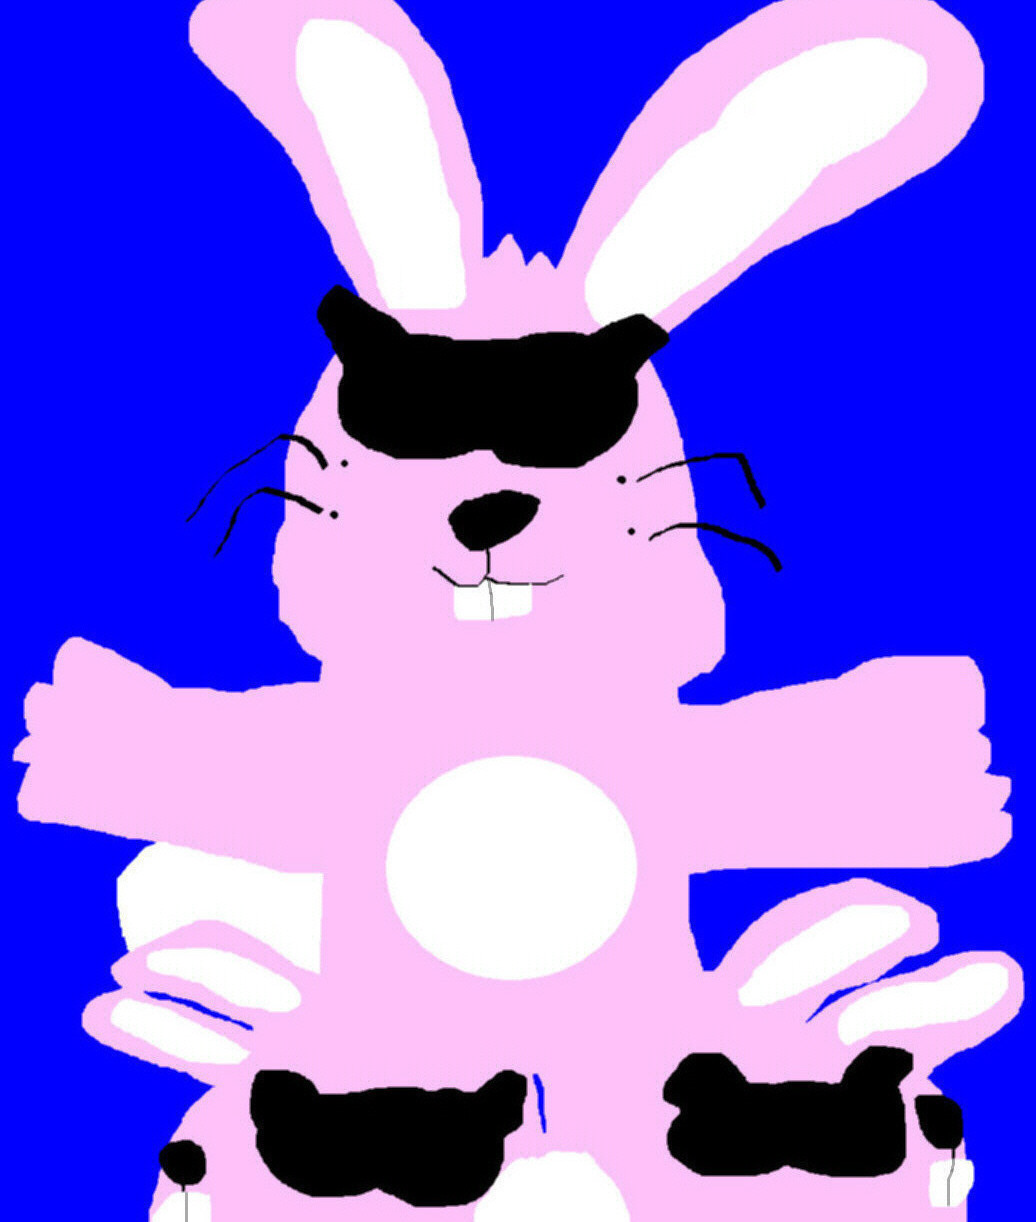 Energizer Bunny In Energizer Bunny Slippers MS Paint^0^ by Falconlobo